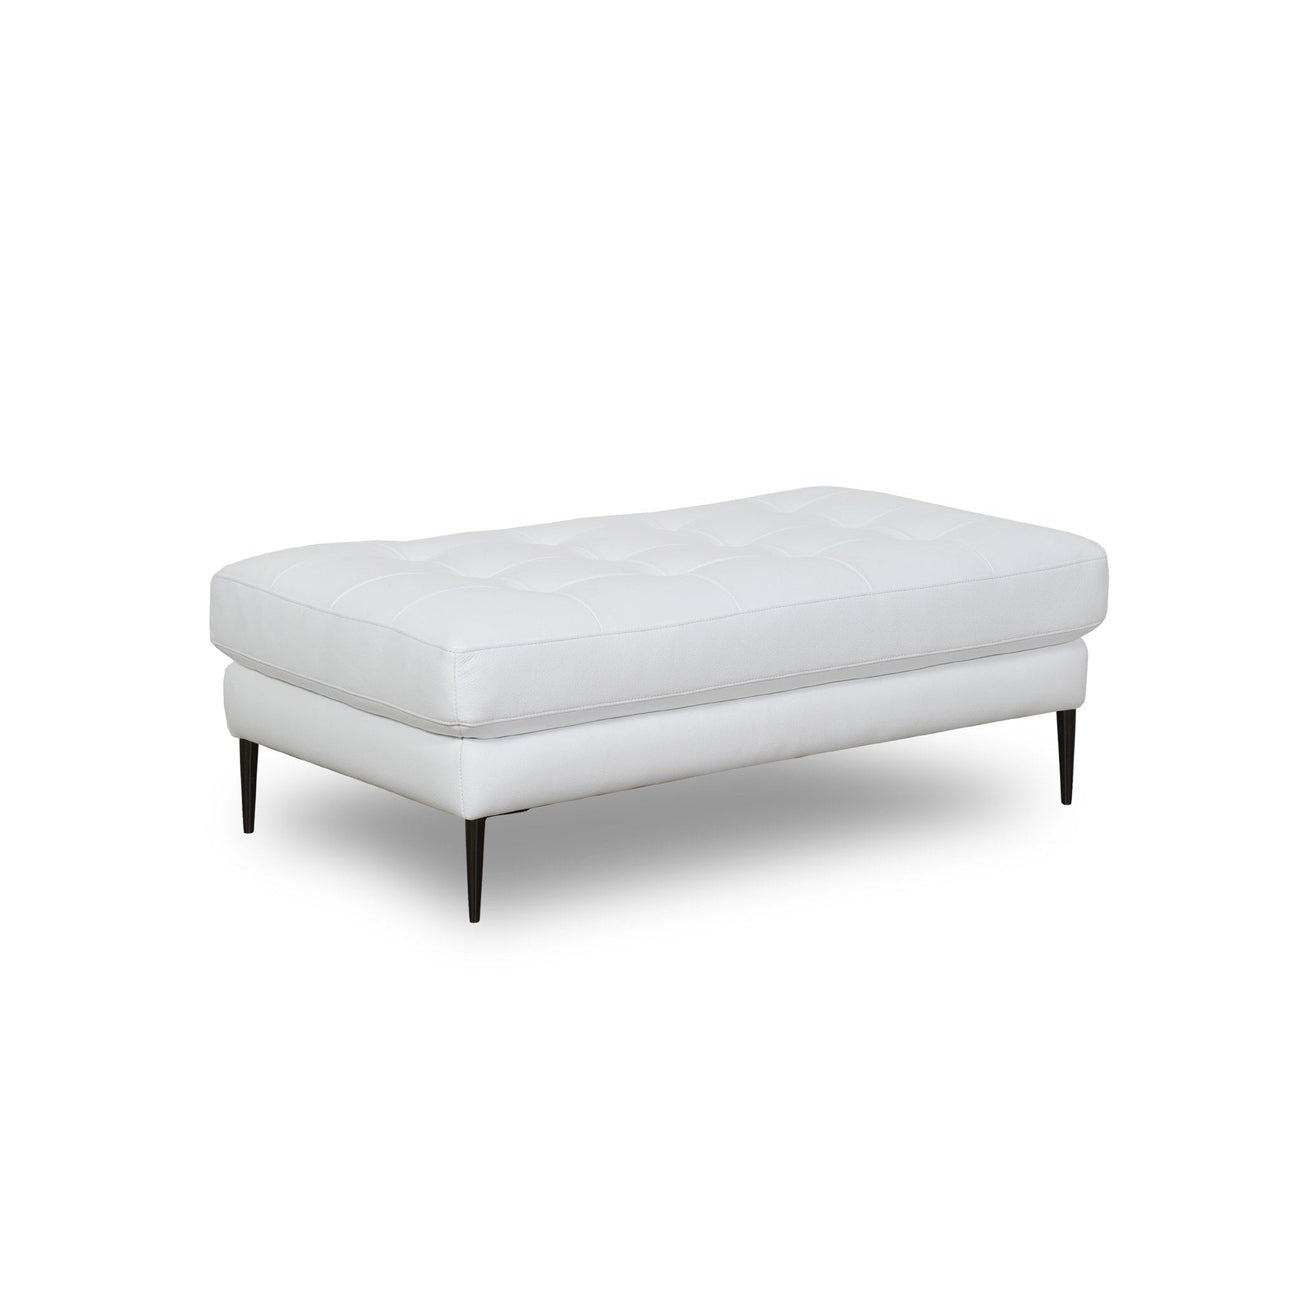 Elson Full Leather Bench Ottoman-Moroni Leather-MORONI-44007BS1641-Stools & OttomansPure White-1-France and Son